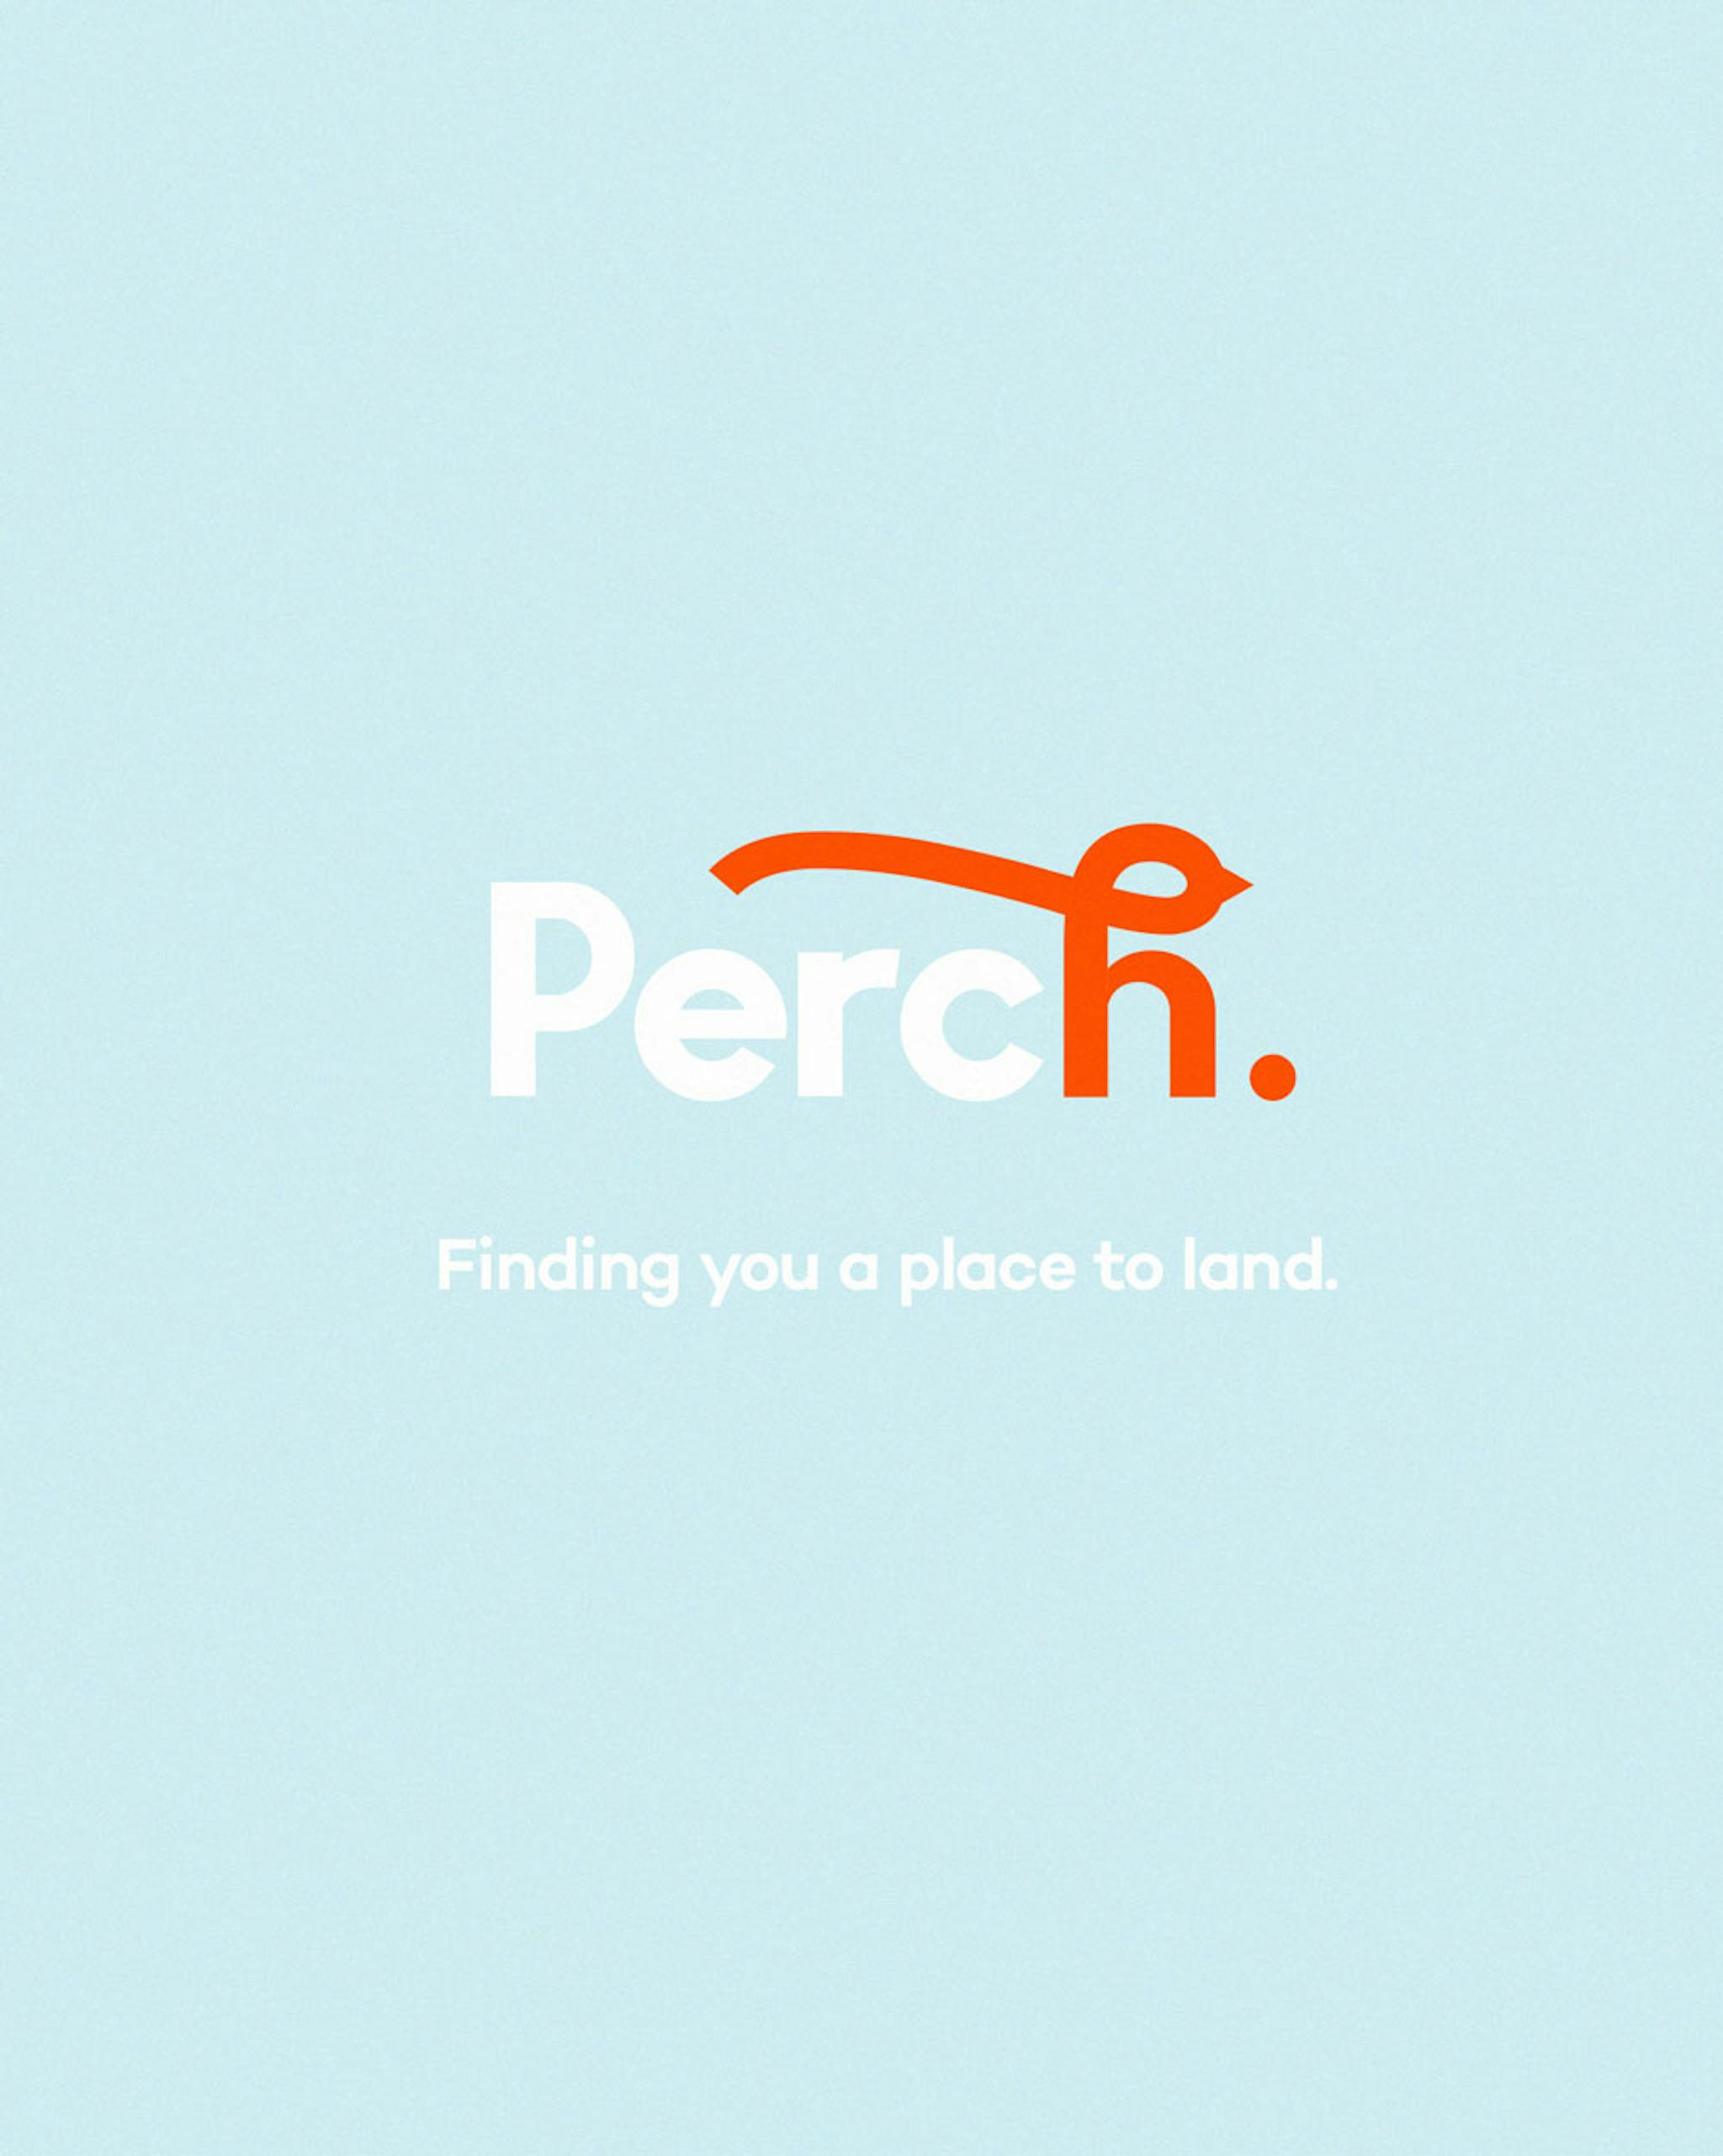 Perch brand development by The Uptown Agency